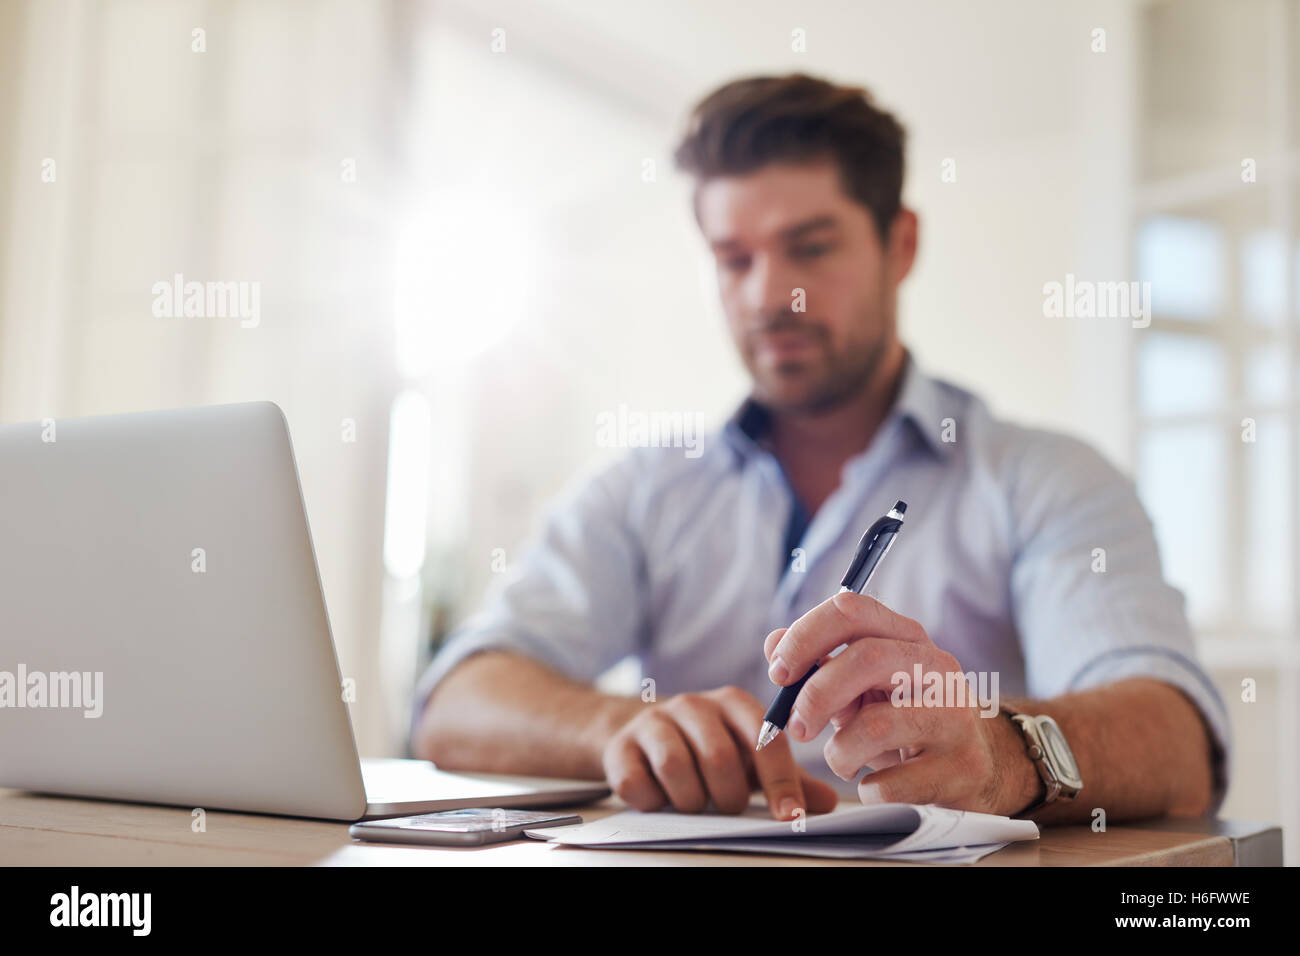 Shot of young businessman at home office with laptop and taking notes. Focus on man hands holding pen. Stock Photo